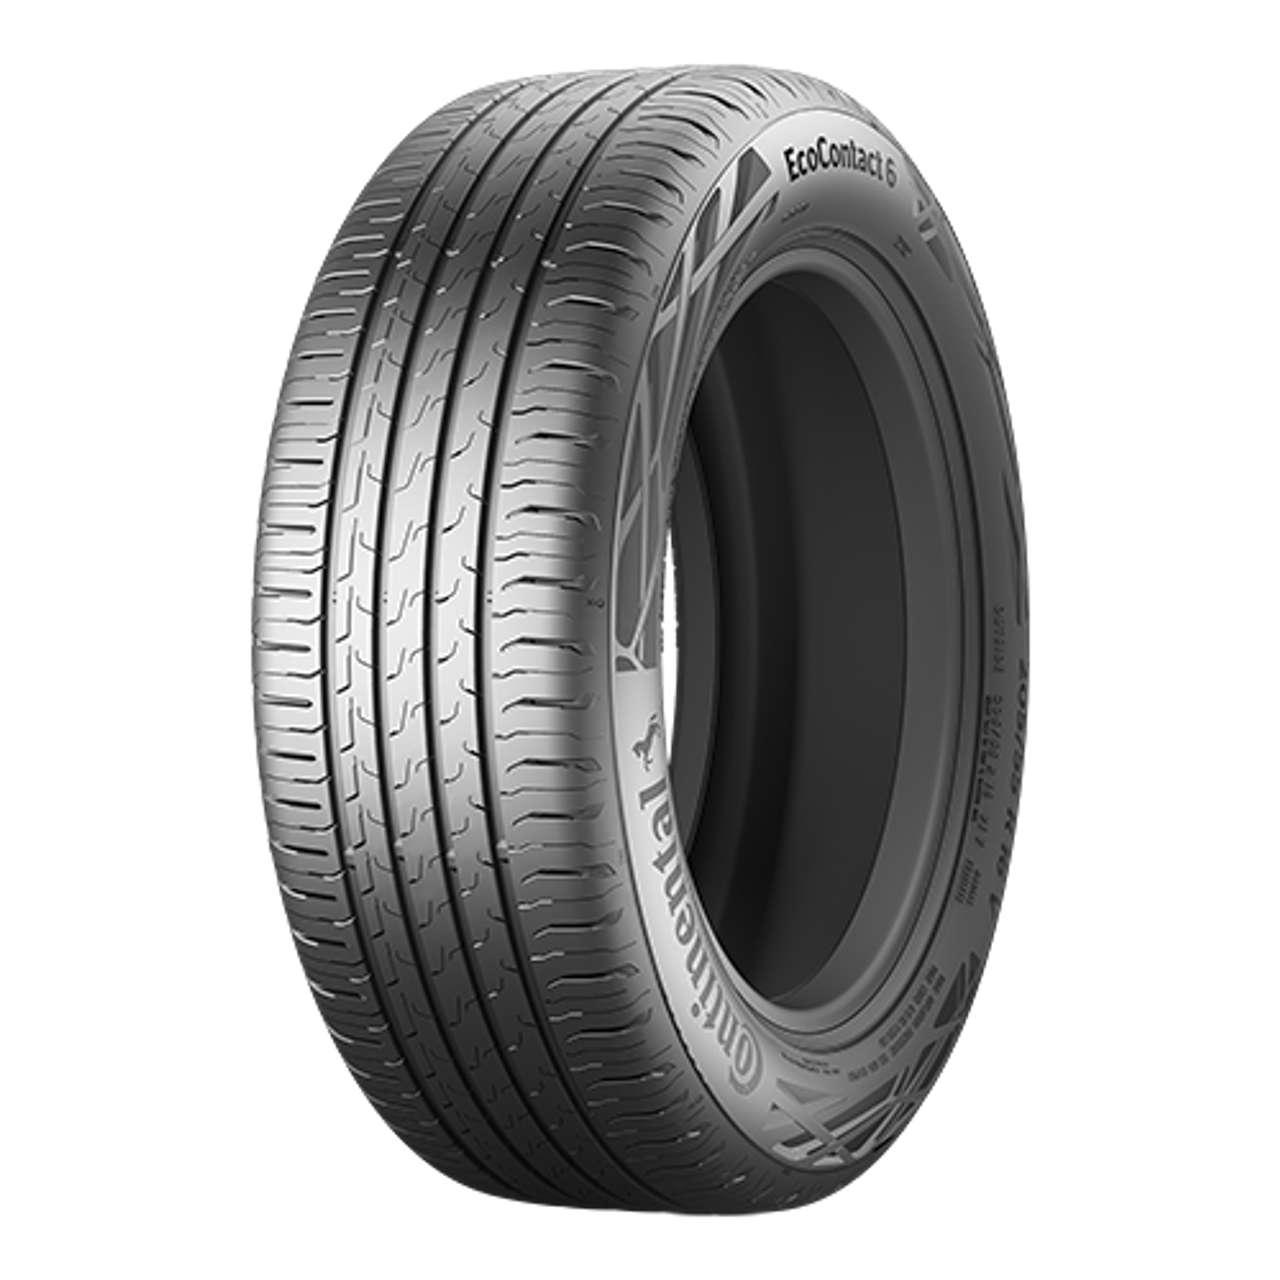 CONTINENTAL ECOCONTACT 6 (AO) (EVc) 225/55R18 102Y